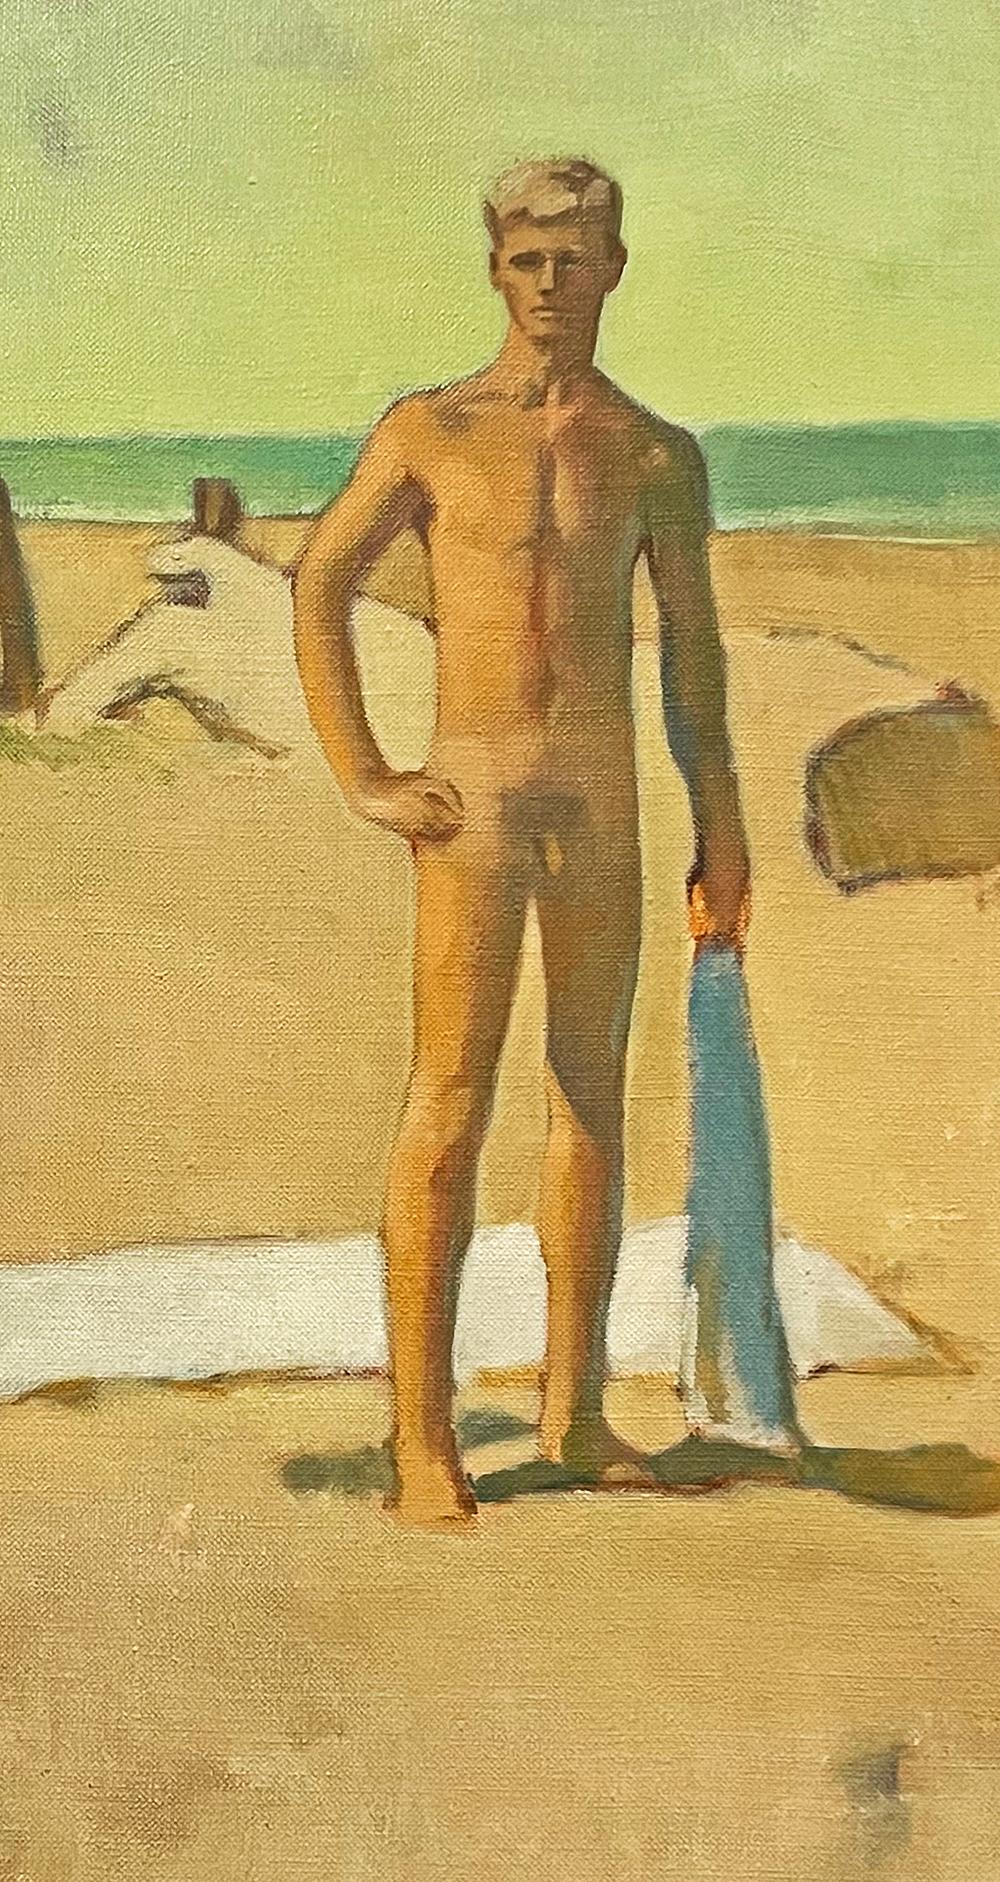 This atmospheric and magical view of a single nude male figure on a California beach is imbued with lovely, unexpected colors and textures which rise up to a sky that is a pale shade of green.  The blond young man has been sunbathing on a towel